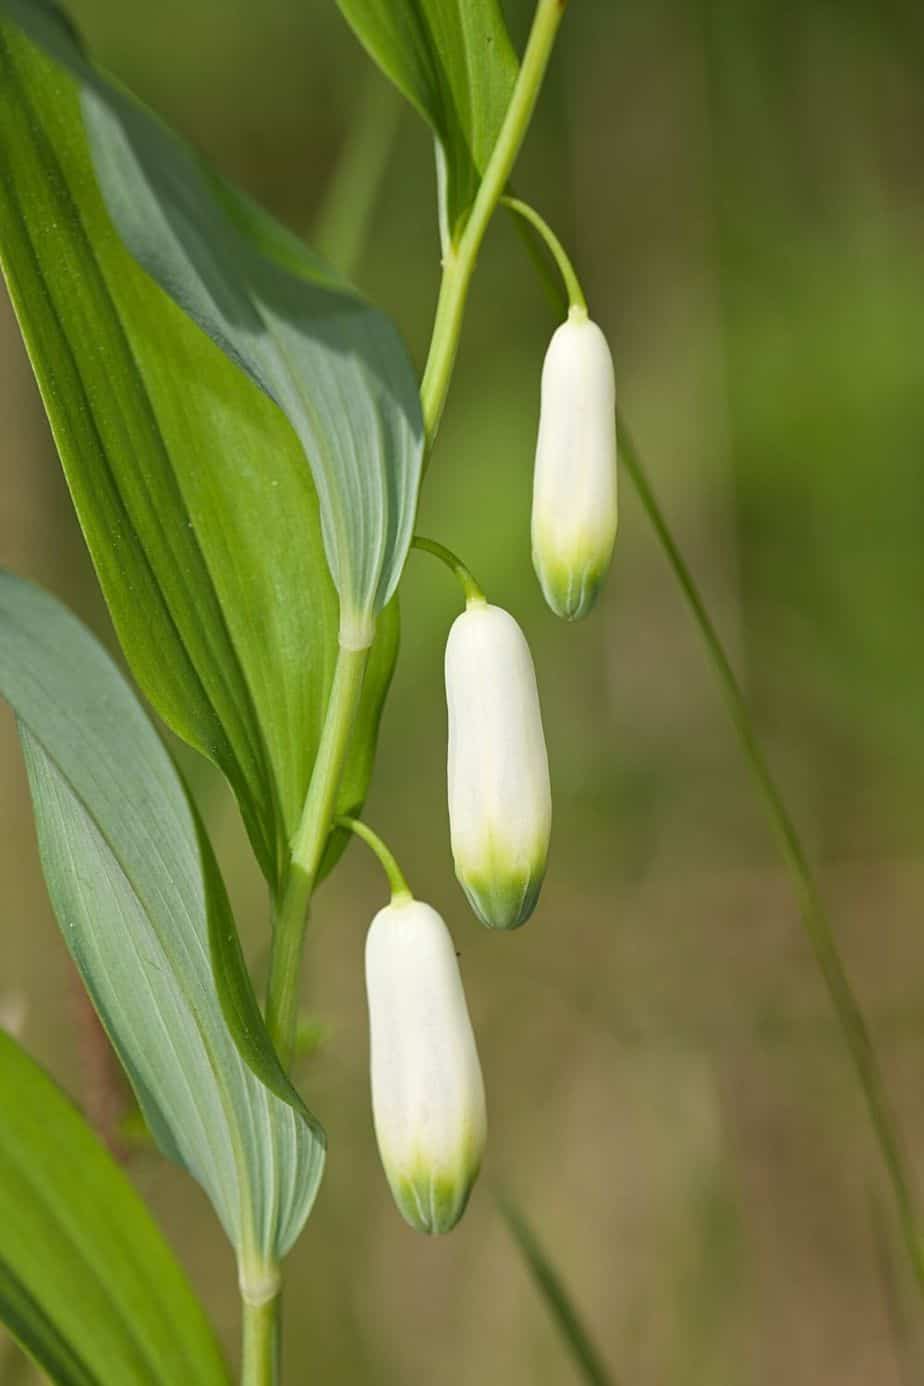 Polygonatum × hybridum (Solomon's seal) is a plant that grows like a shrub that you can place in your northwest facing garden